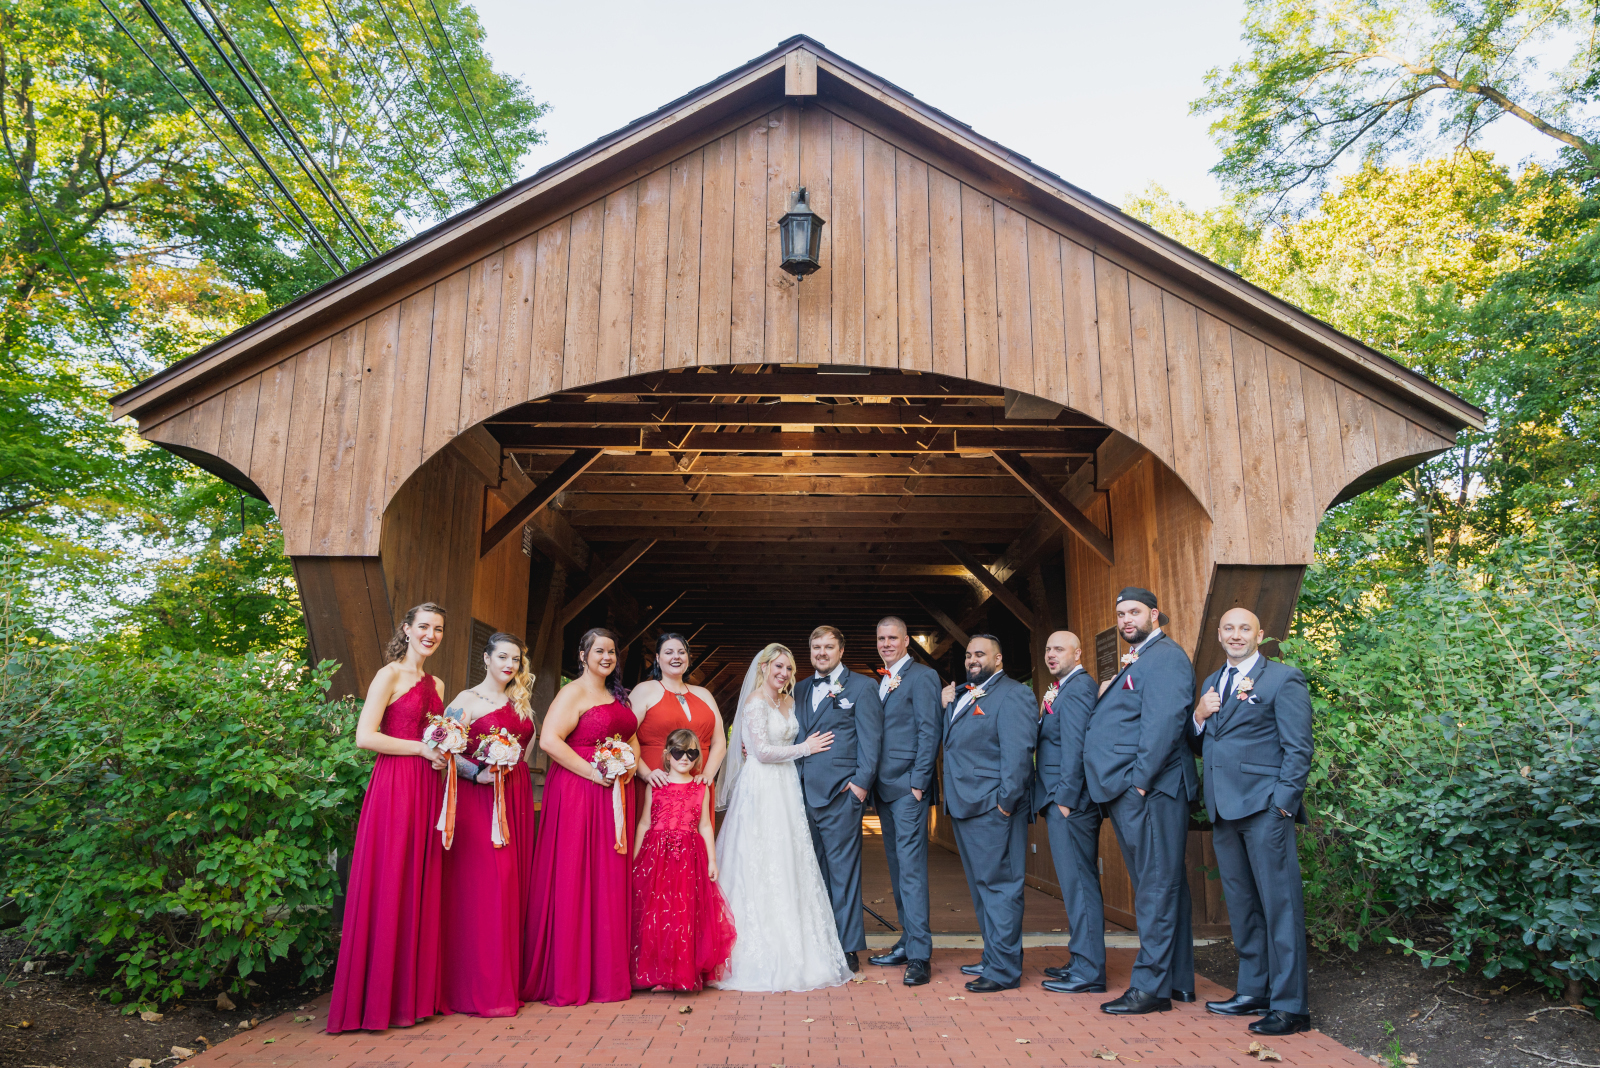 Bride and groom with bridal party, bridal party portrait, covered bridge, nature, green, trees, fall wedding, cute outdoor wedding ceremony at Grand Pacific Wedding Gardens